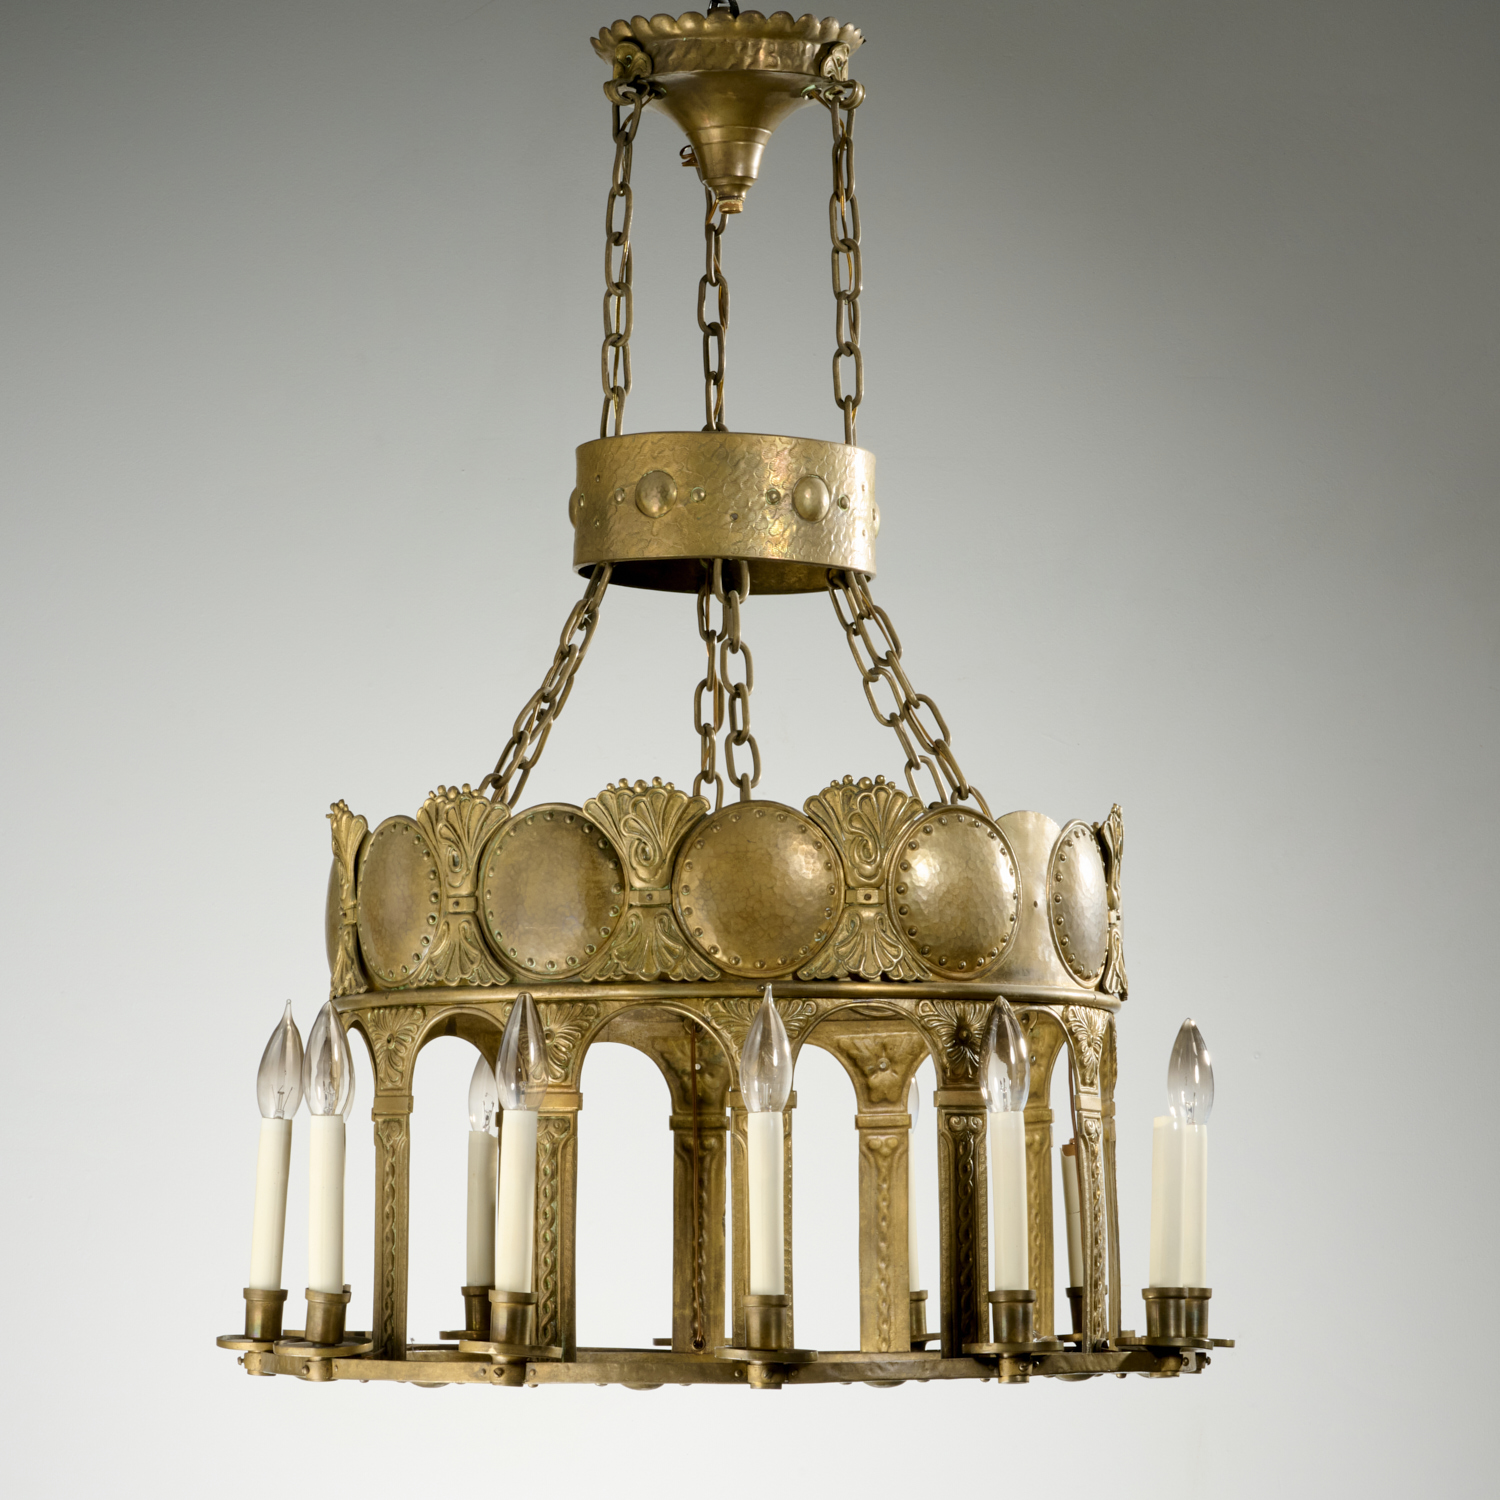 Brass Gothic Antique Chandeliers, Sconces & Lighting Fixtures for